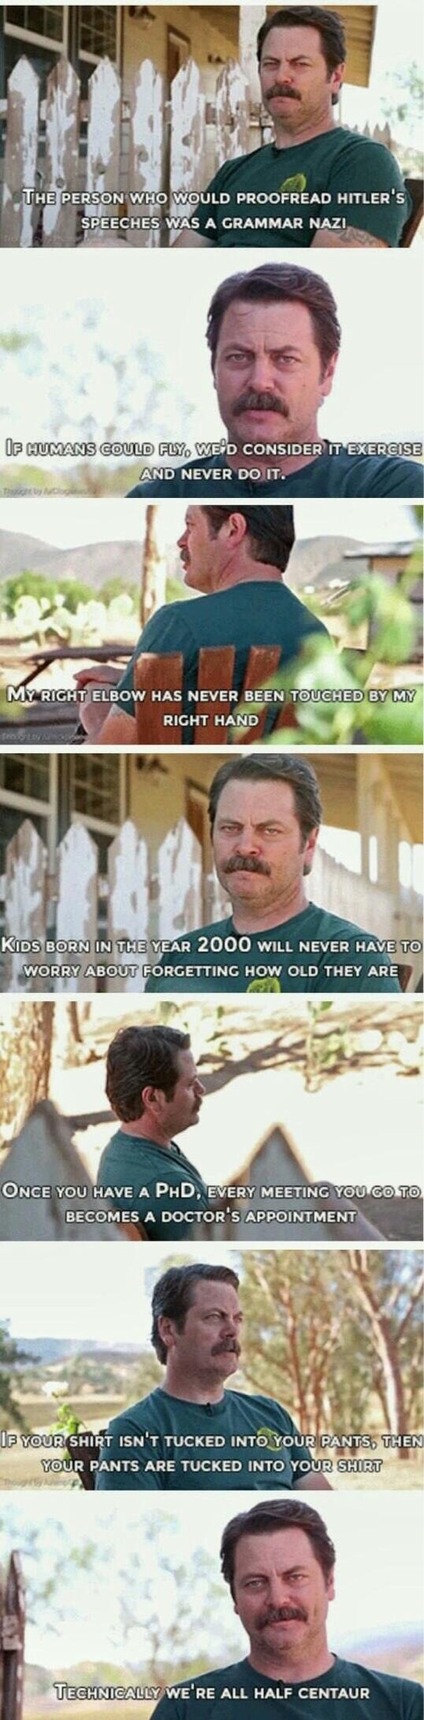 shower thoughts with Ron Swanson - meme